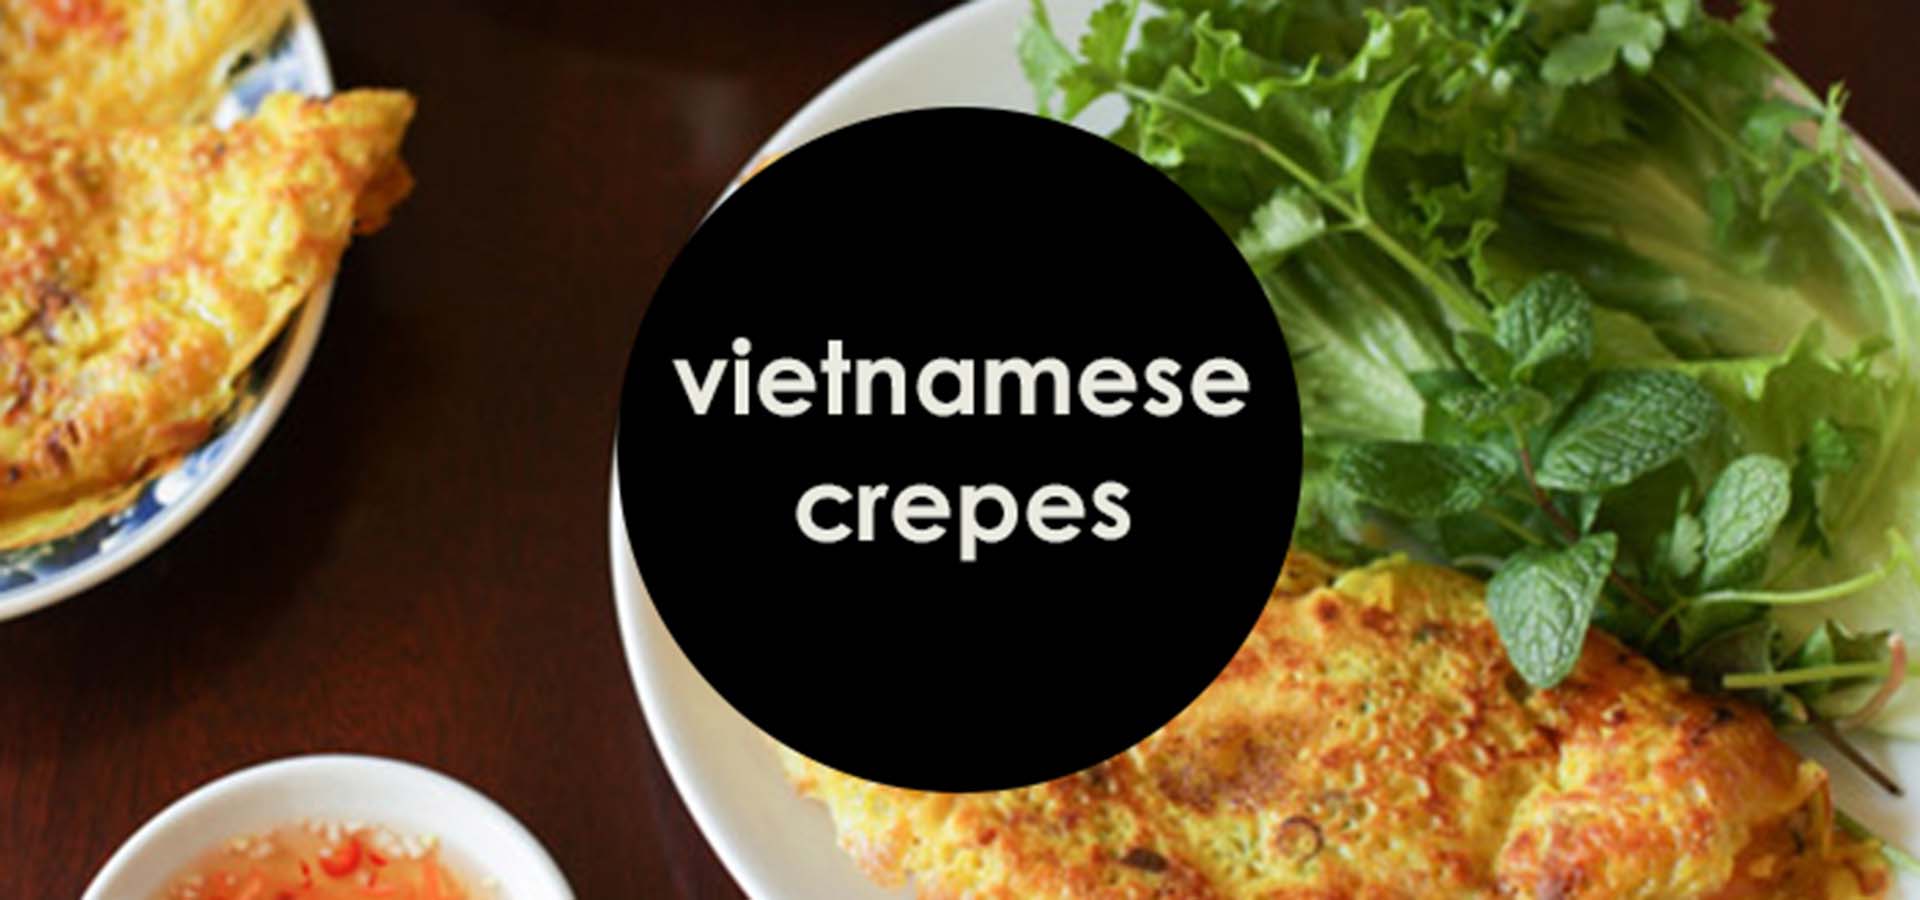 Table with plated Vietnamese crepes.